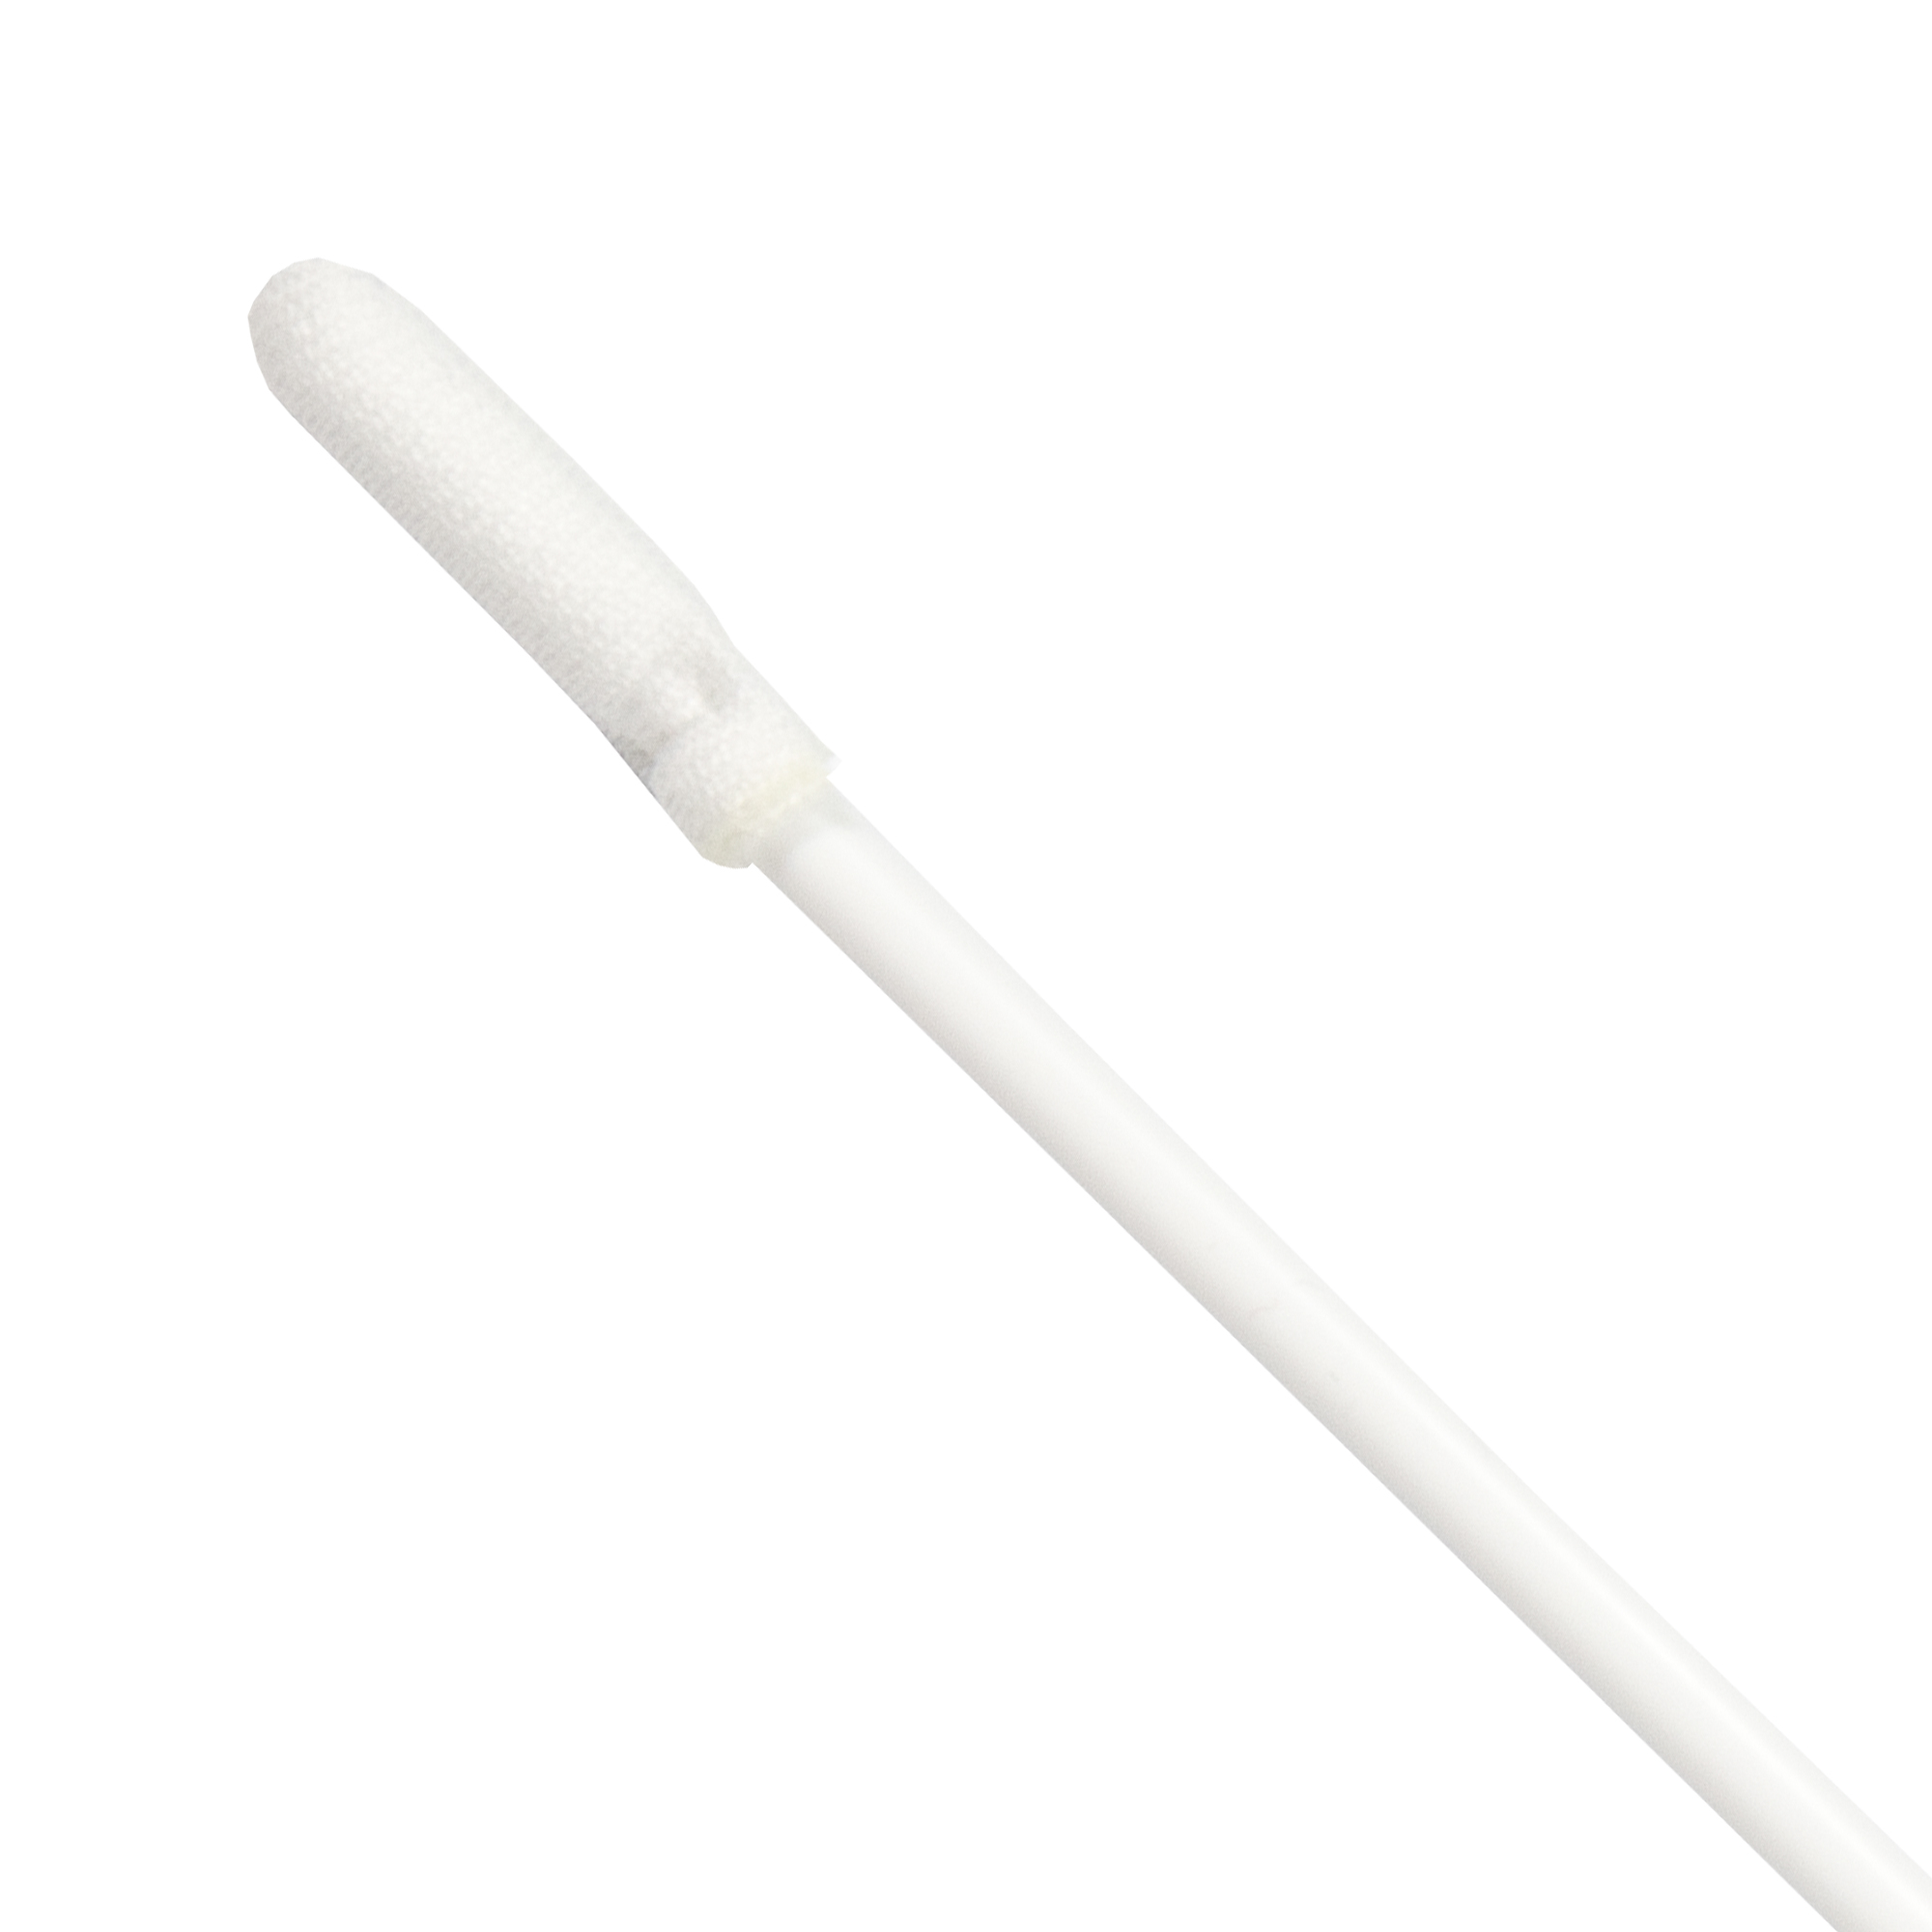 Cleaning Stick/Swab PS3605